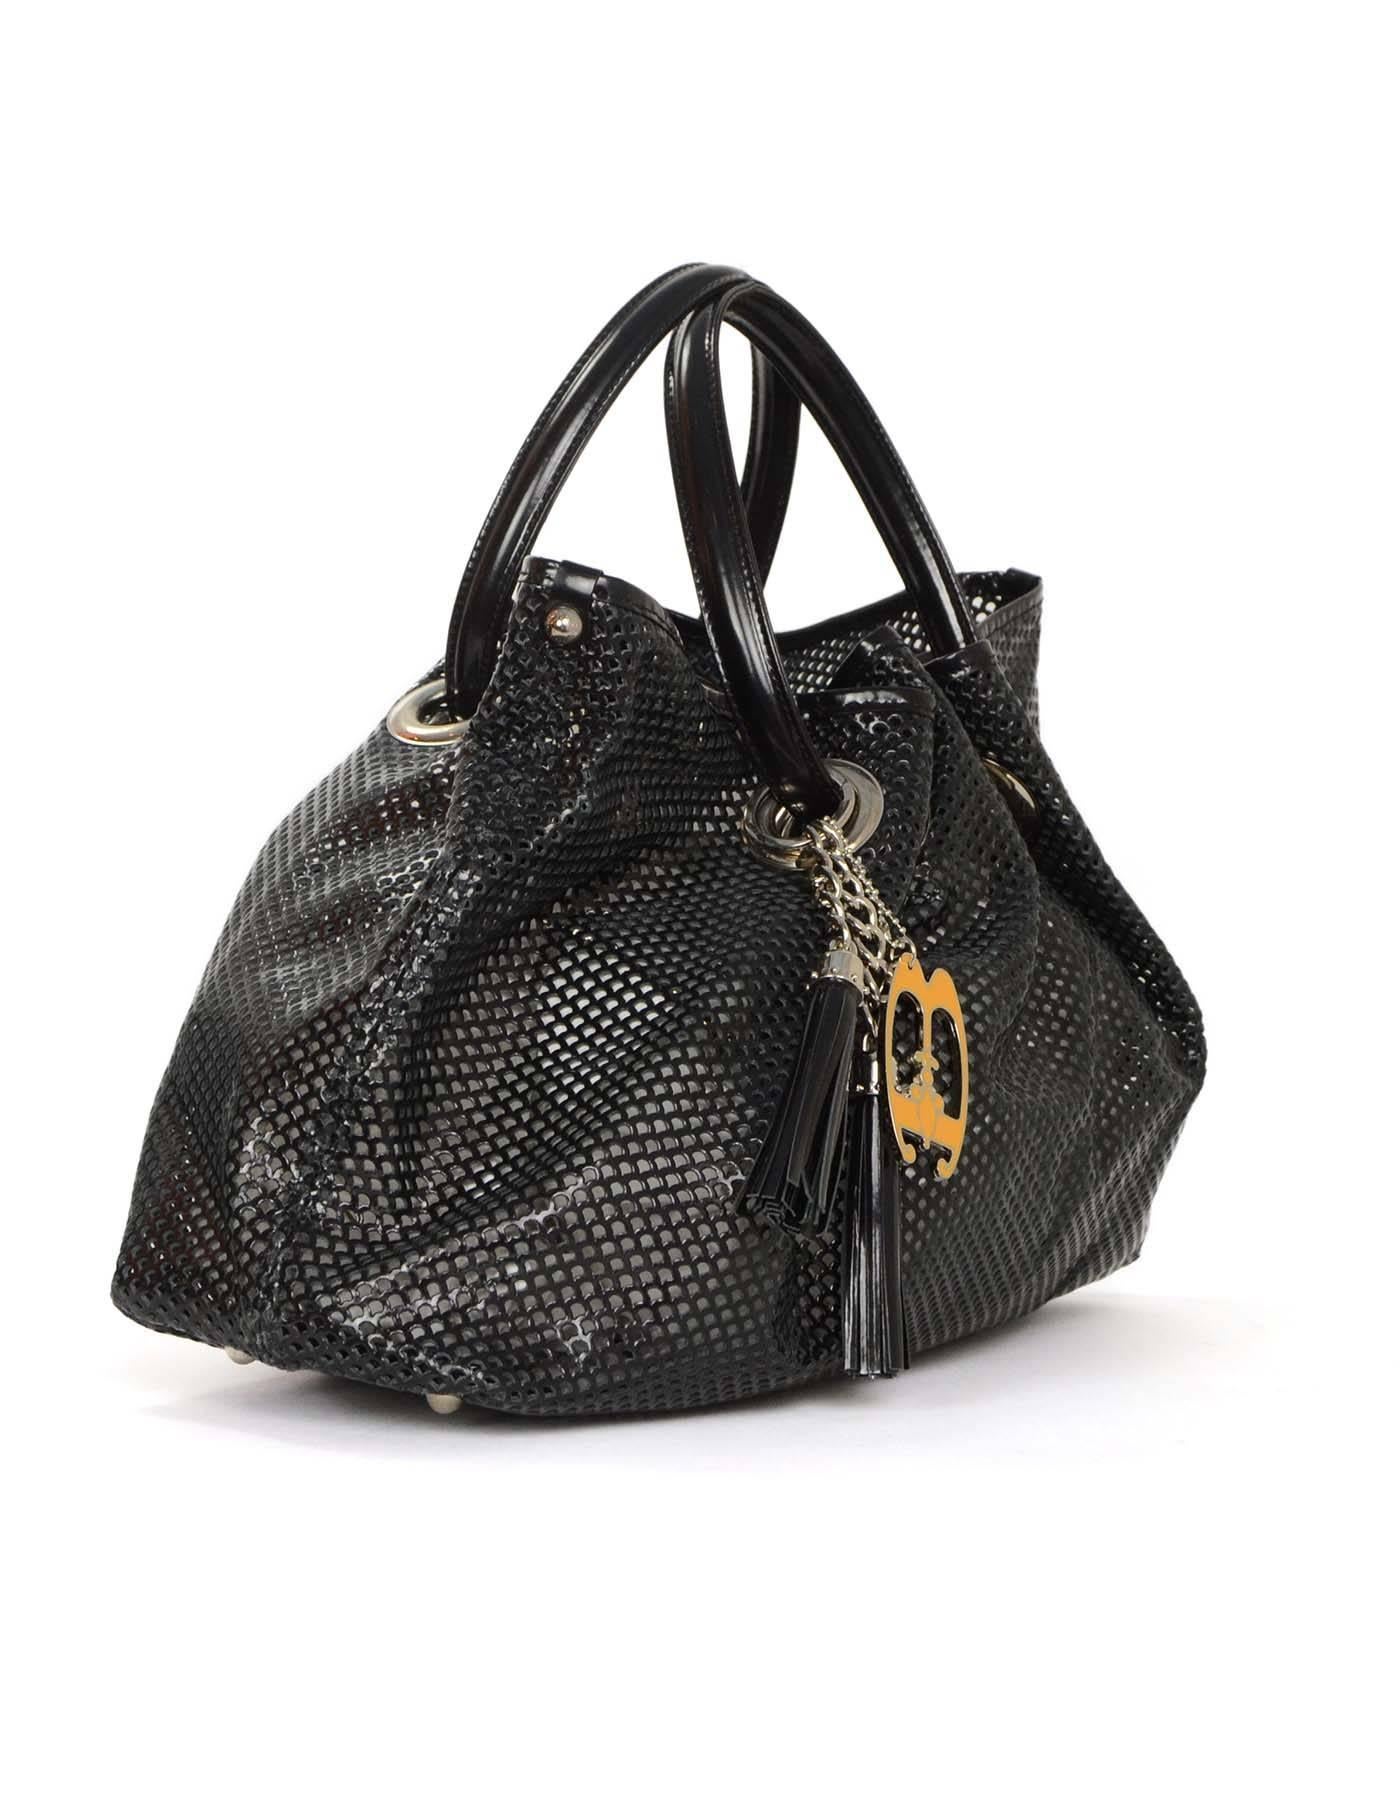 Braccialini Black Perforated Gathered Tote 
Features two tassels and one yellow be charm at front of bag
Made In: Italy
Color: Black
Hardware: Silvertone
Materials: Leather
Lining: None
Closure/Opening: Open top with center magnetic snap